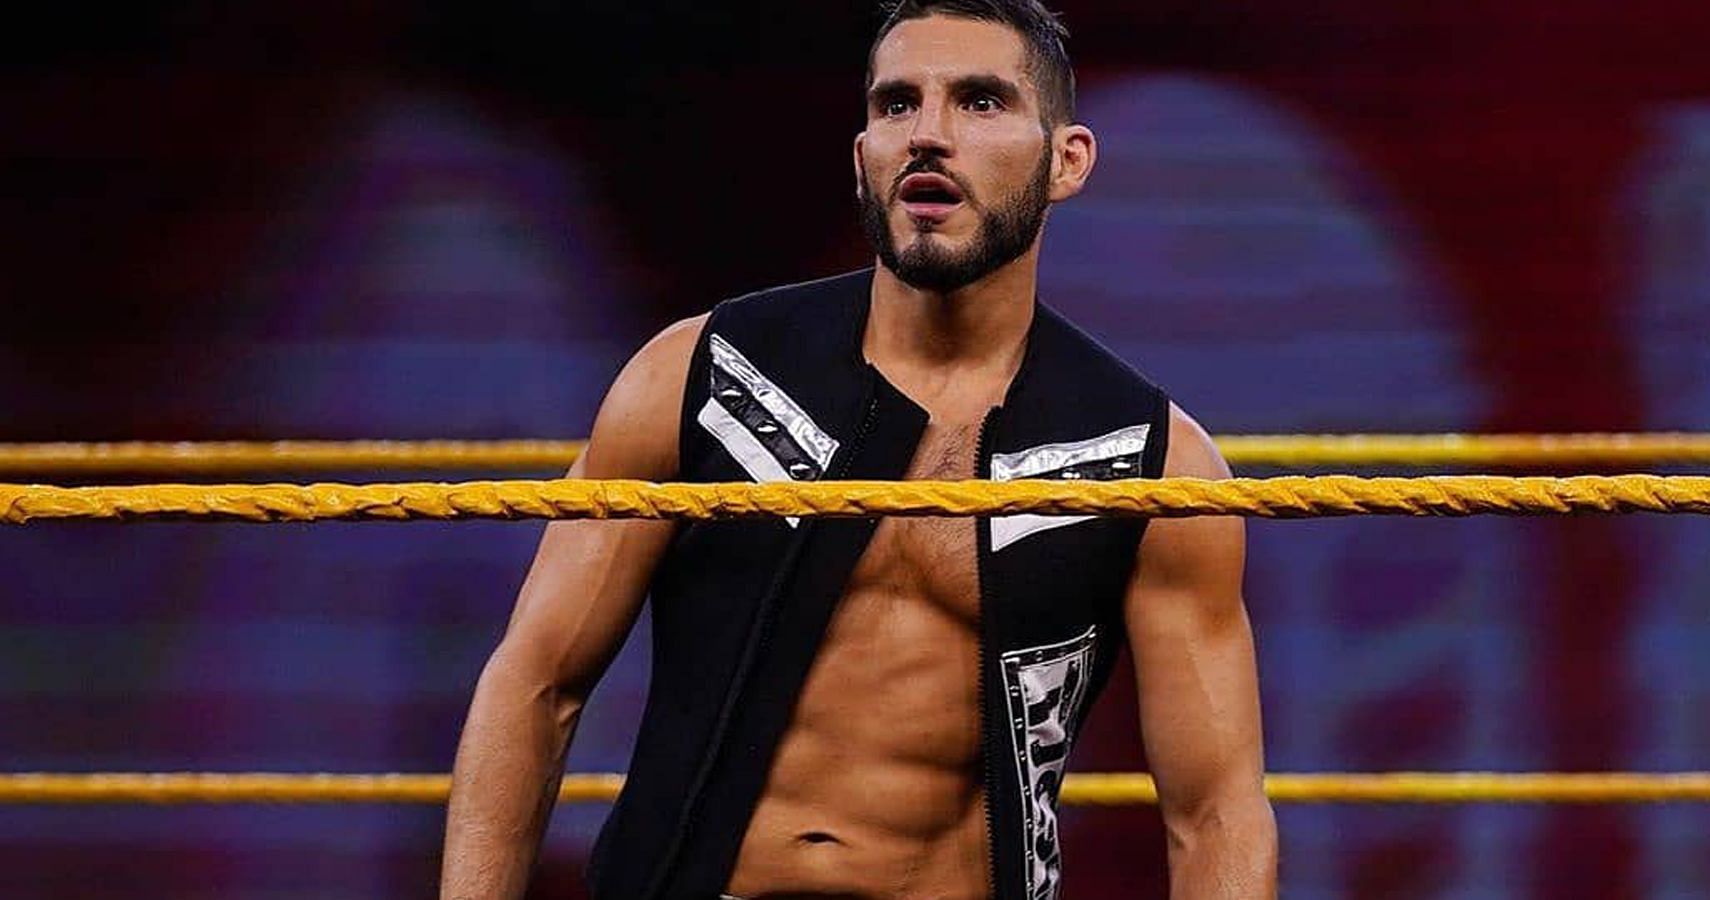 When does Johnny Gargano’s WWE contract expire?